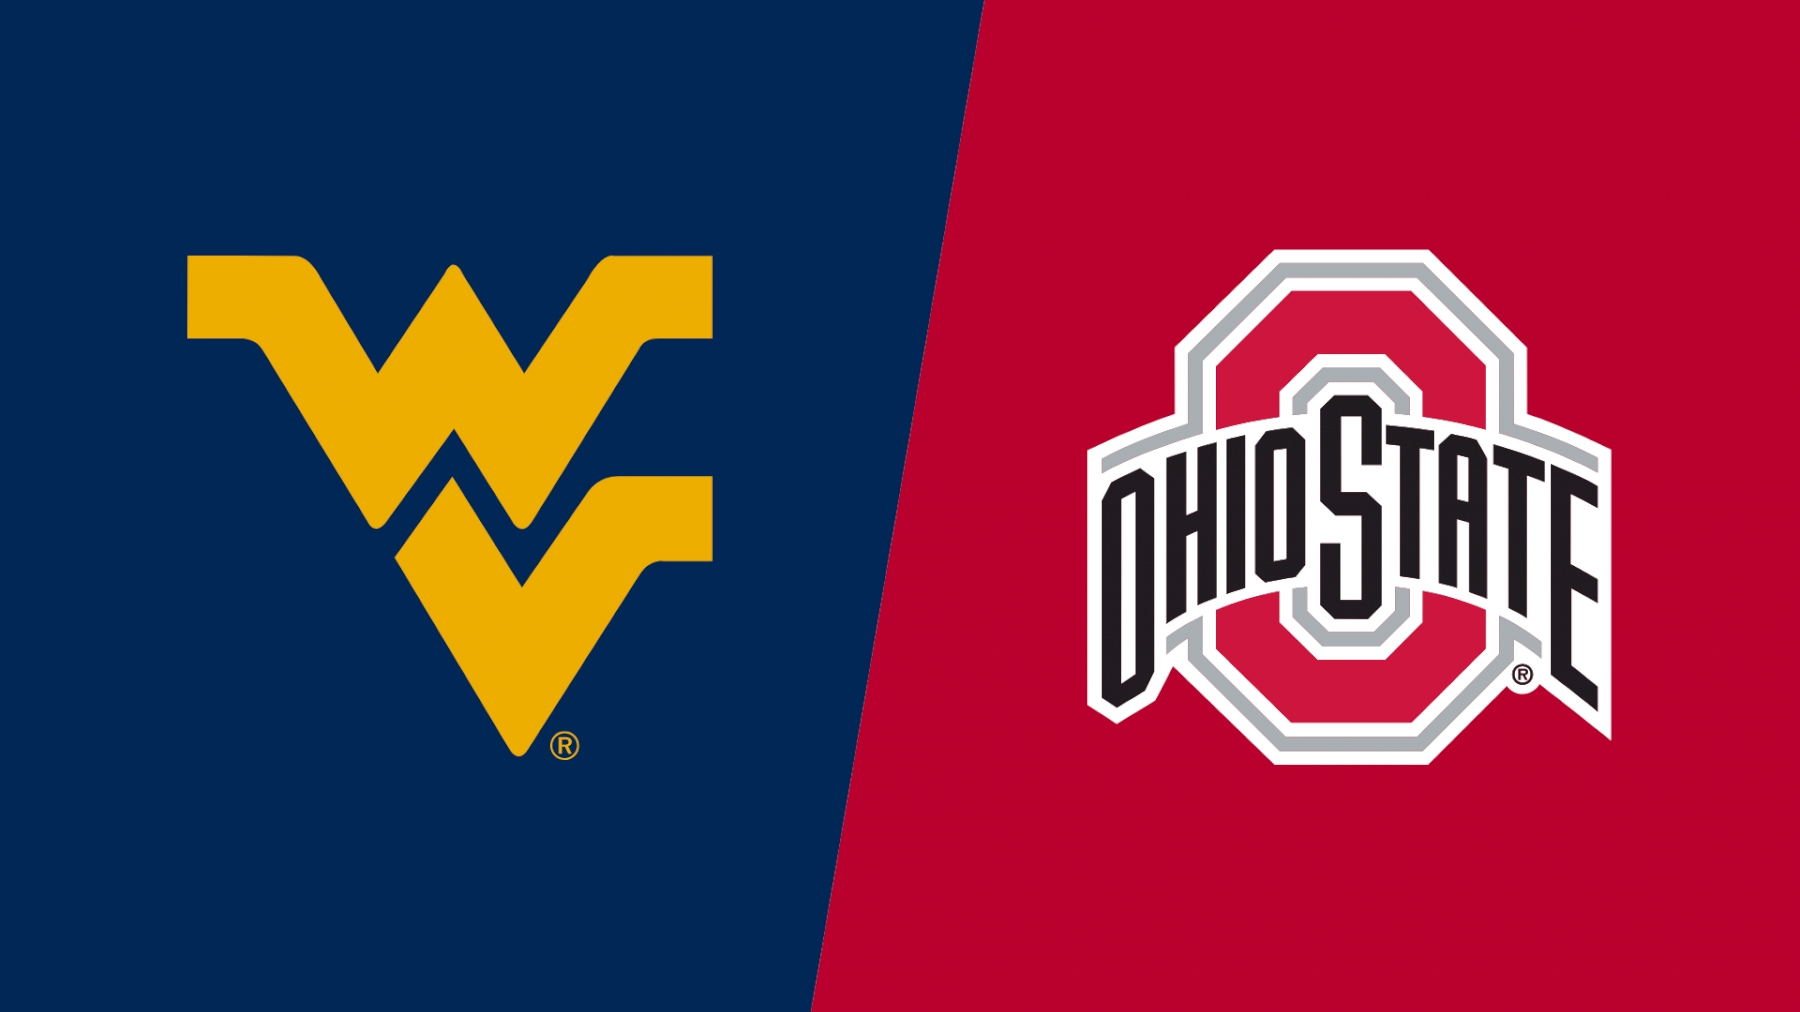 2019 West Virginia vs Ohio State Cleveland Classic Men's Basketball